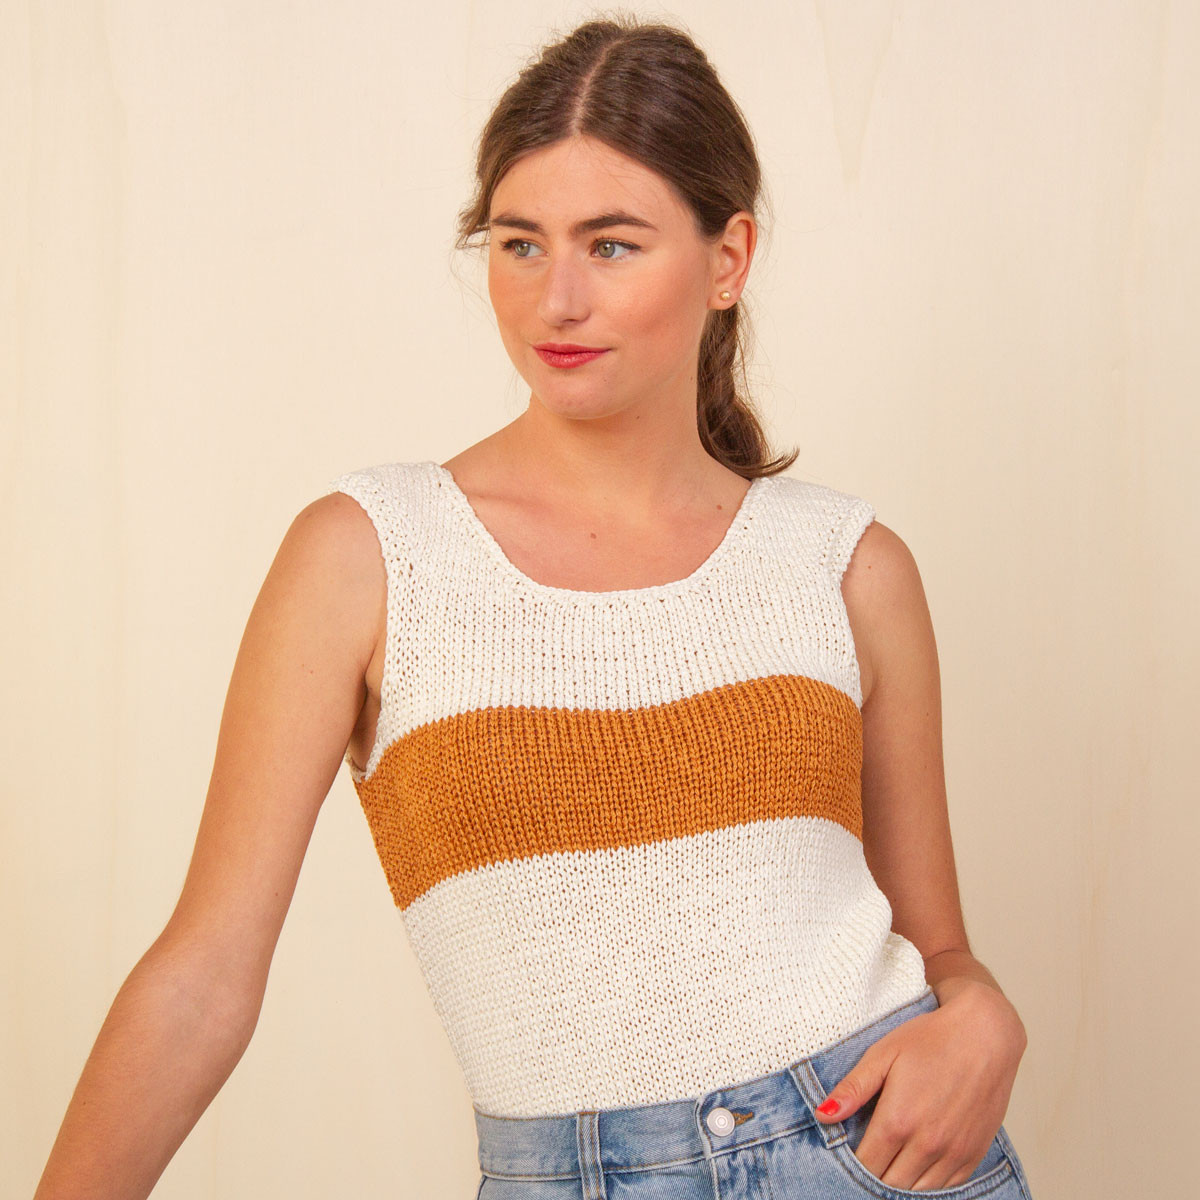 Women's top to knit